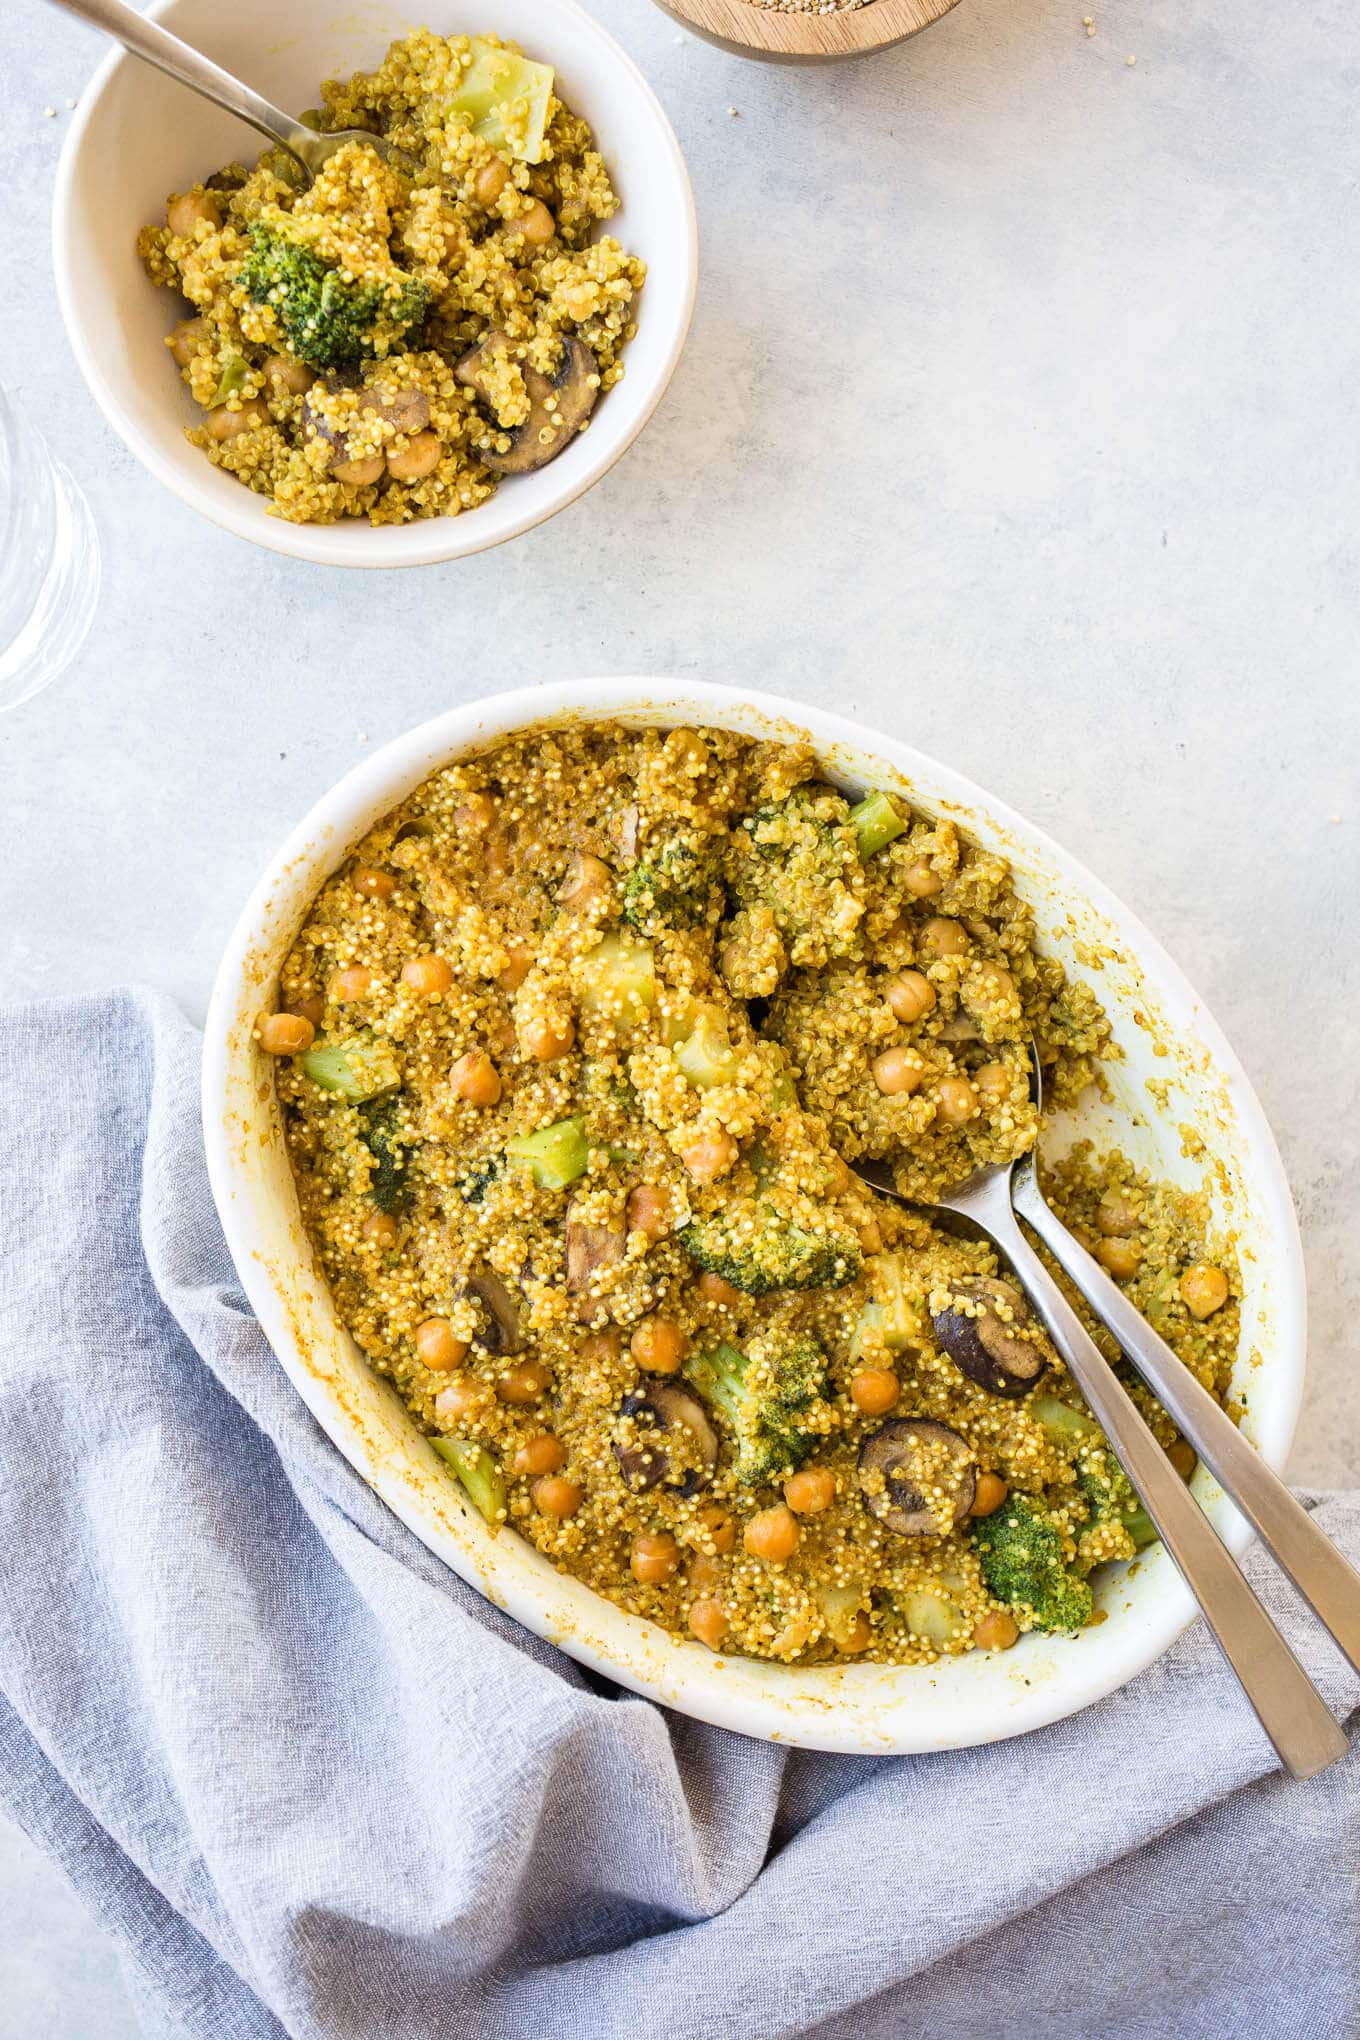 Curried Coconut Quinoa Bake makes for an easy, one-pot weeknight meal. Gluten-free, vegan. 